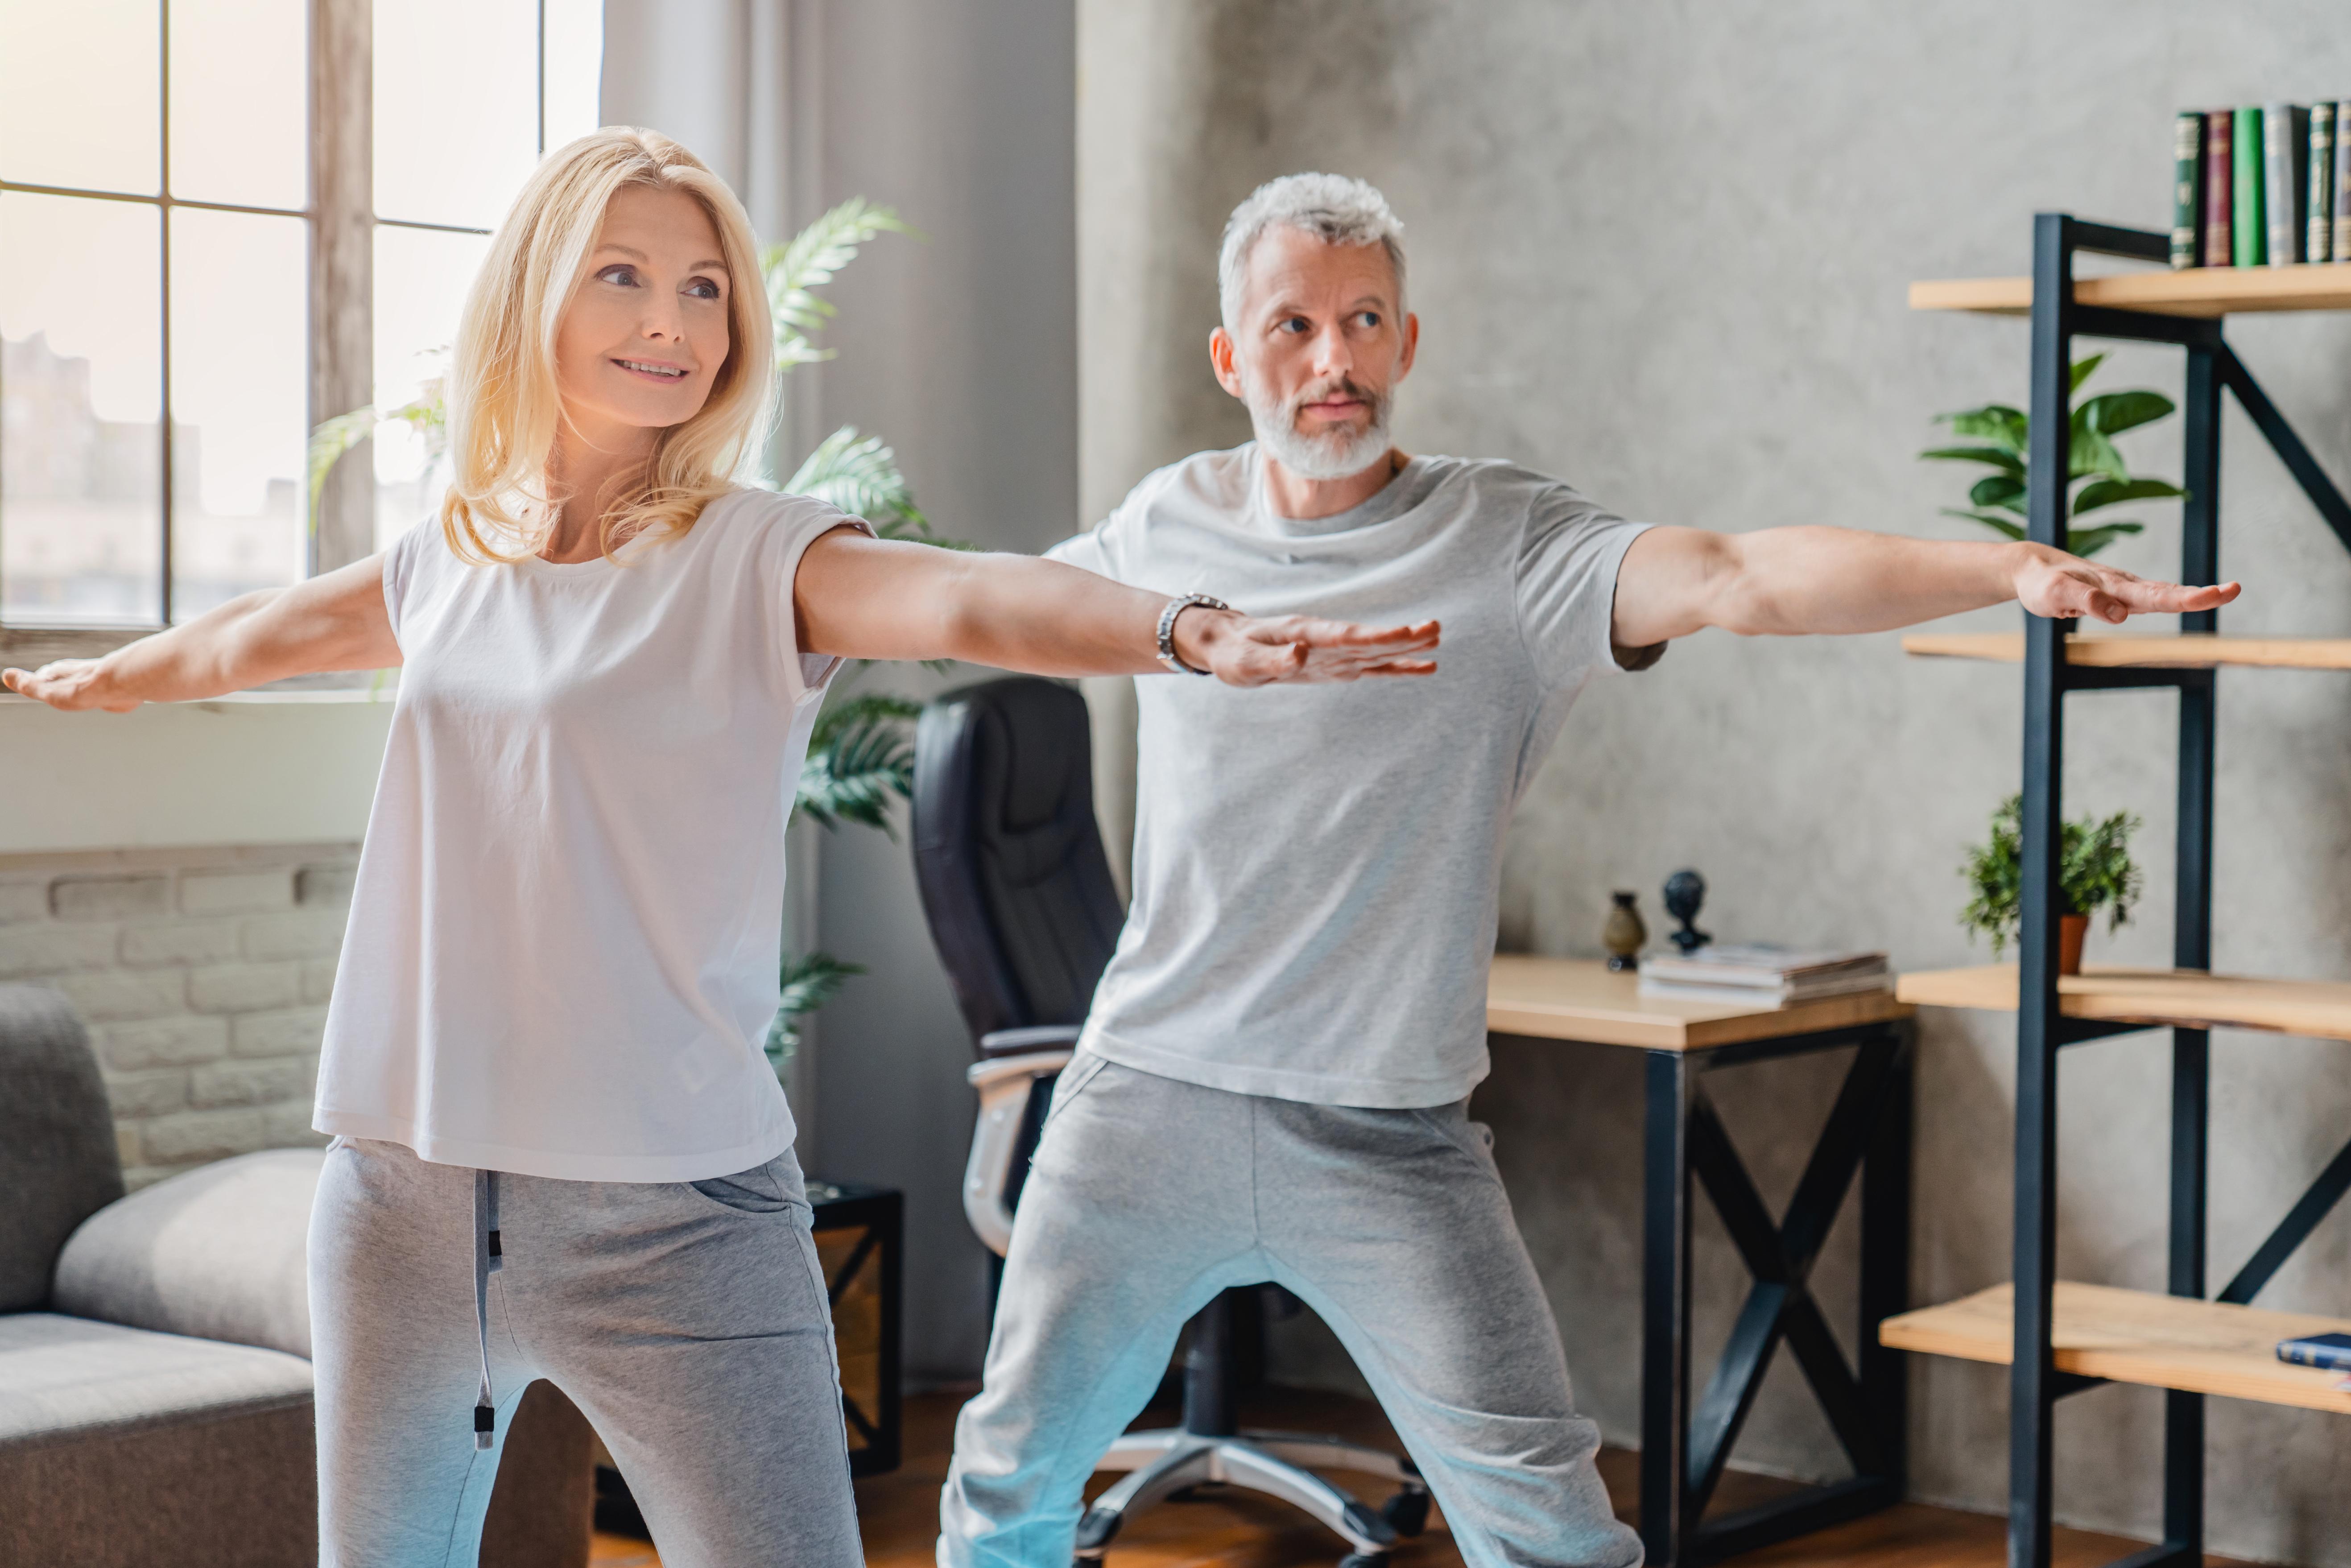 Mature couple practicing yoga and performing warrior yoga pose together